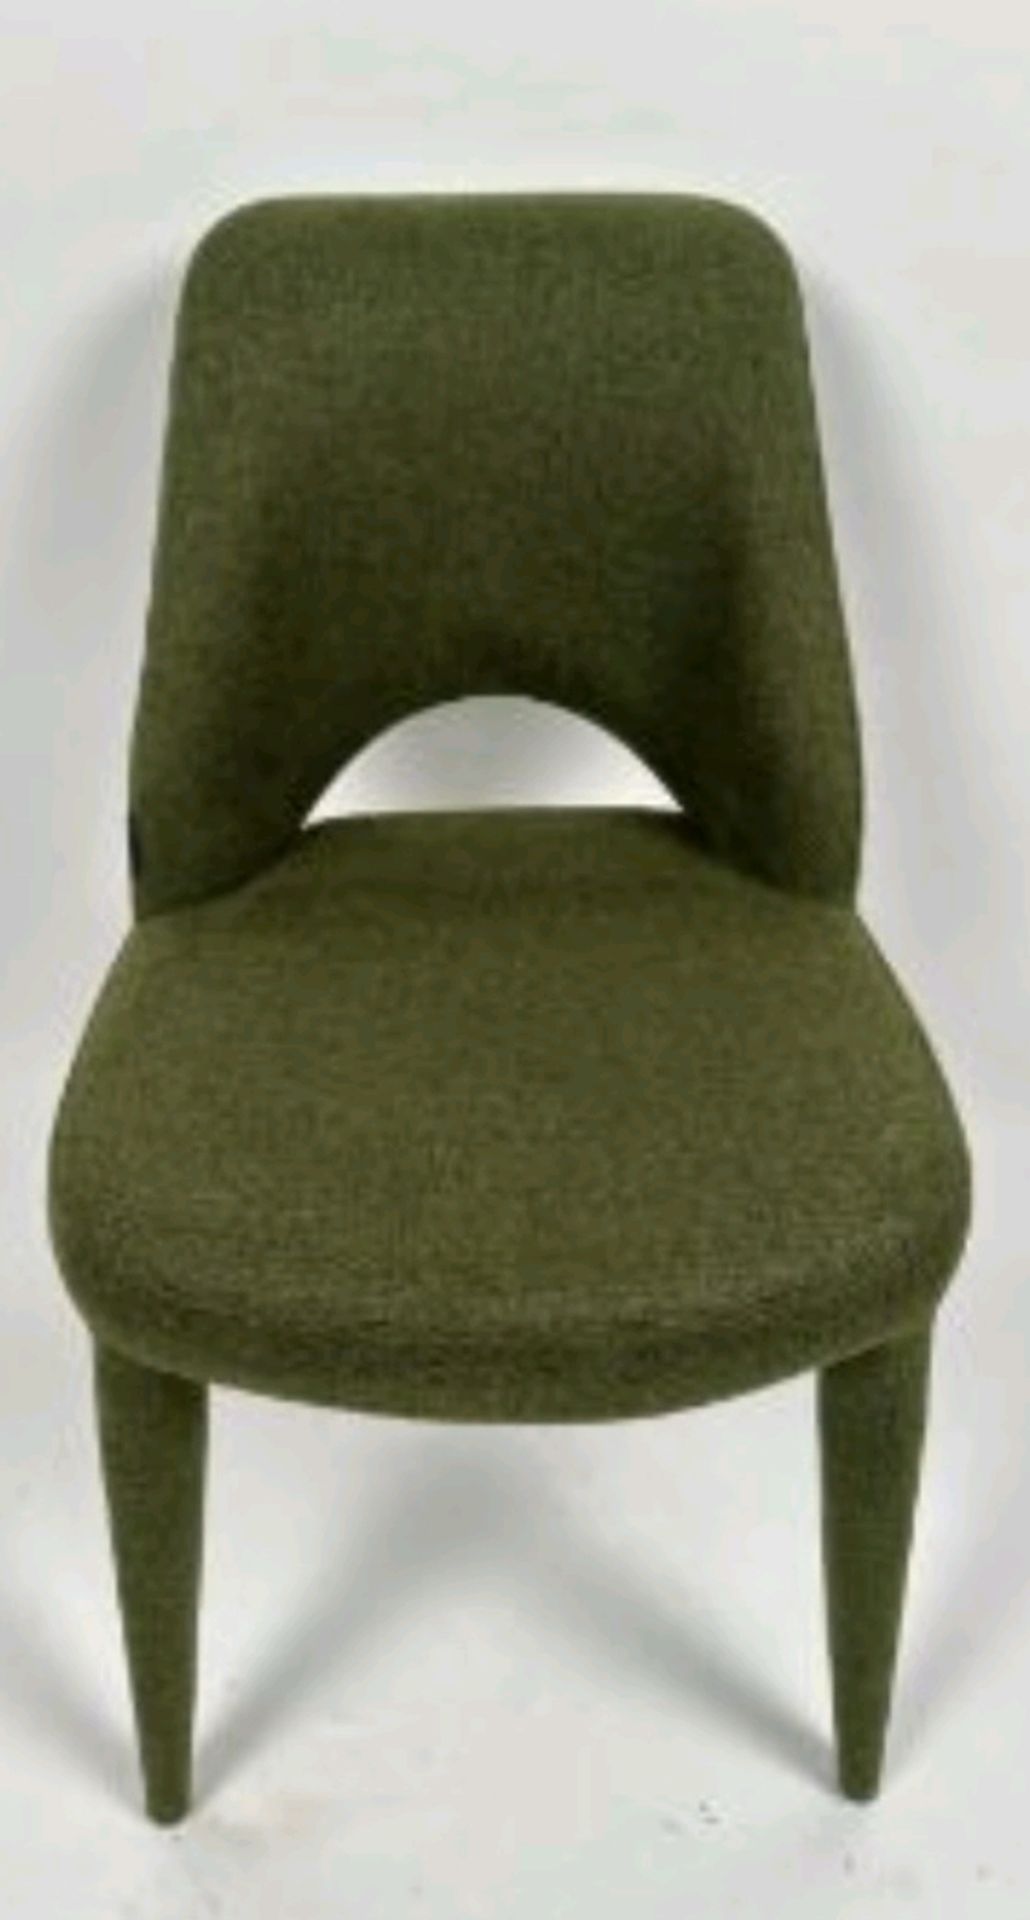 Pols Potten Holy Padded Chair Forest Green - Image 4 of 5